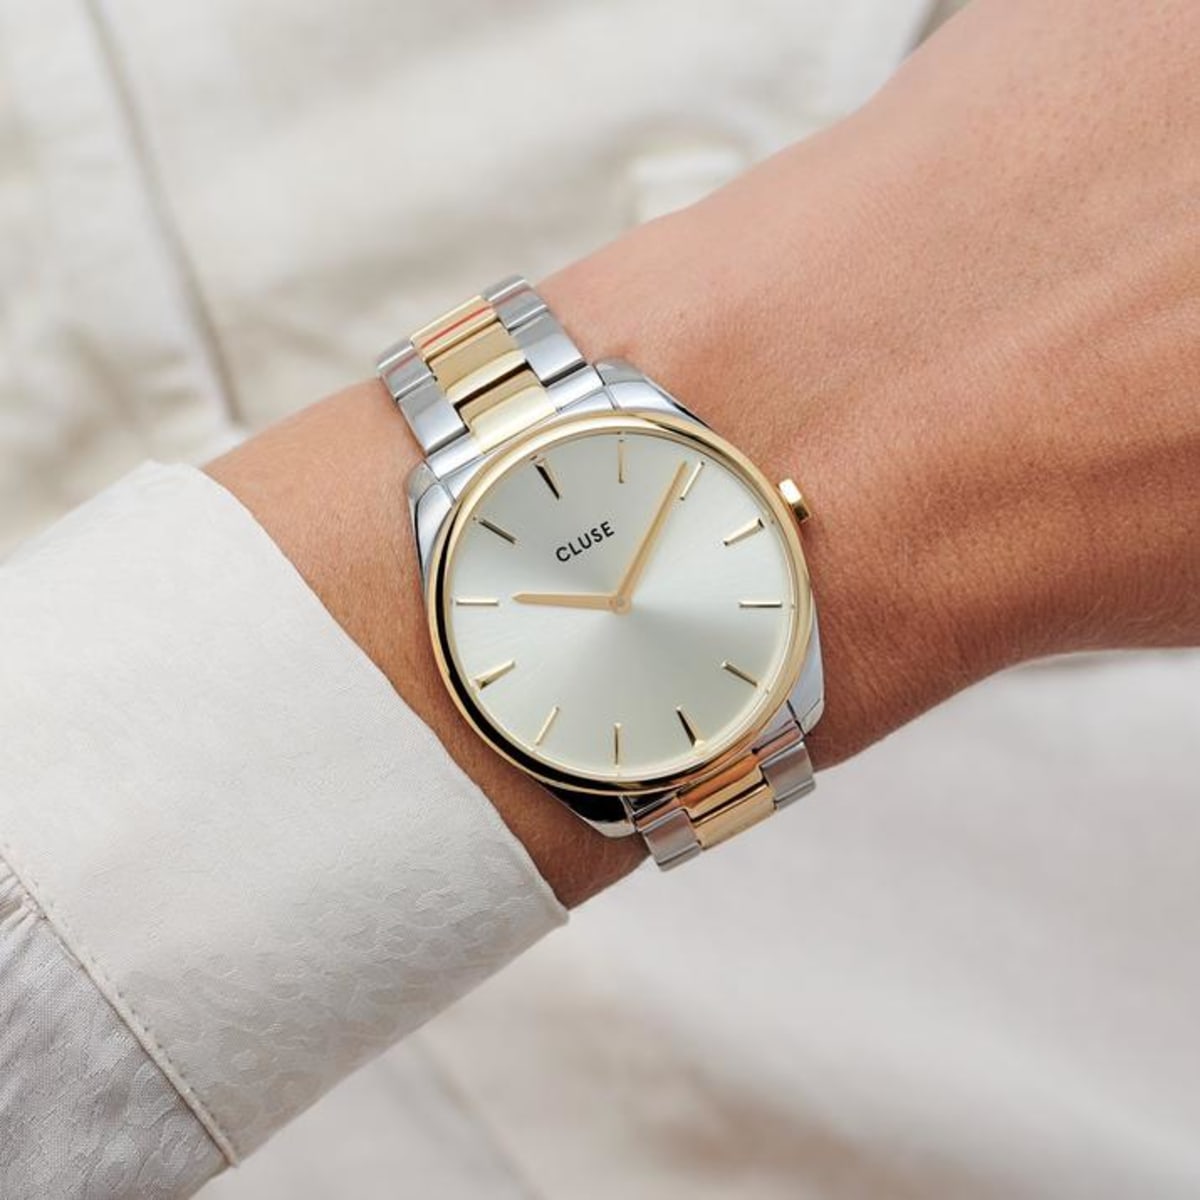 If you like to blur the lines between minimalism and glamour, this bicolor CLUSE Féroce watch offers you the best of both worlds. It's a true classic. An ode to our love for minimalism and joie de vivre. Its 36 mm case is refined but pronounced: a perfect companion for the mid-sized wrist. The gold sunray dial blends perfectly with its bicolor silver & gold case and link bracelet. You can easily interchange the strap of this Féroce model with any 18 mm CLUSE watch strap.